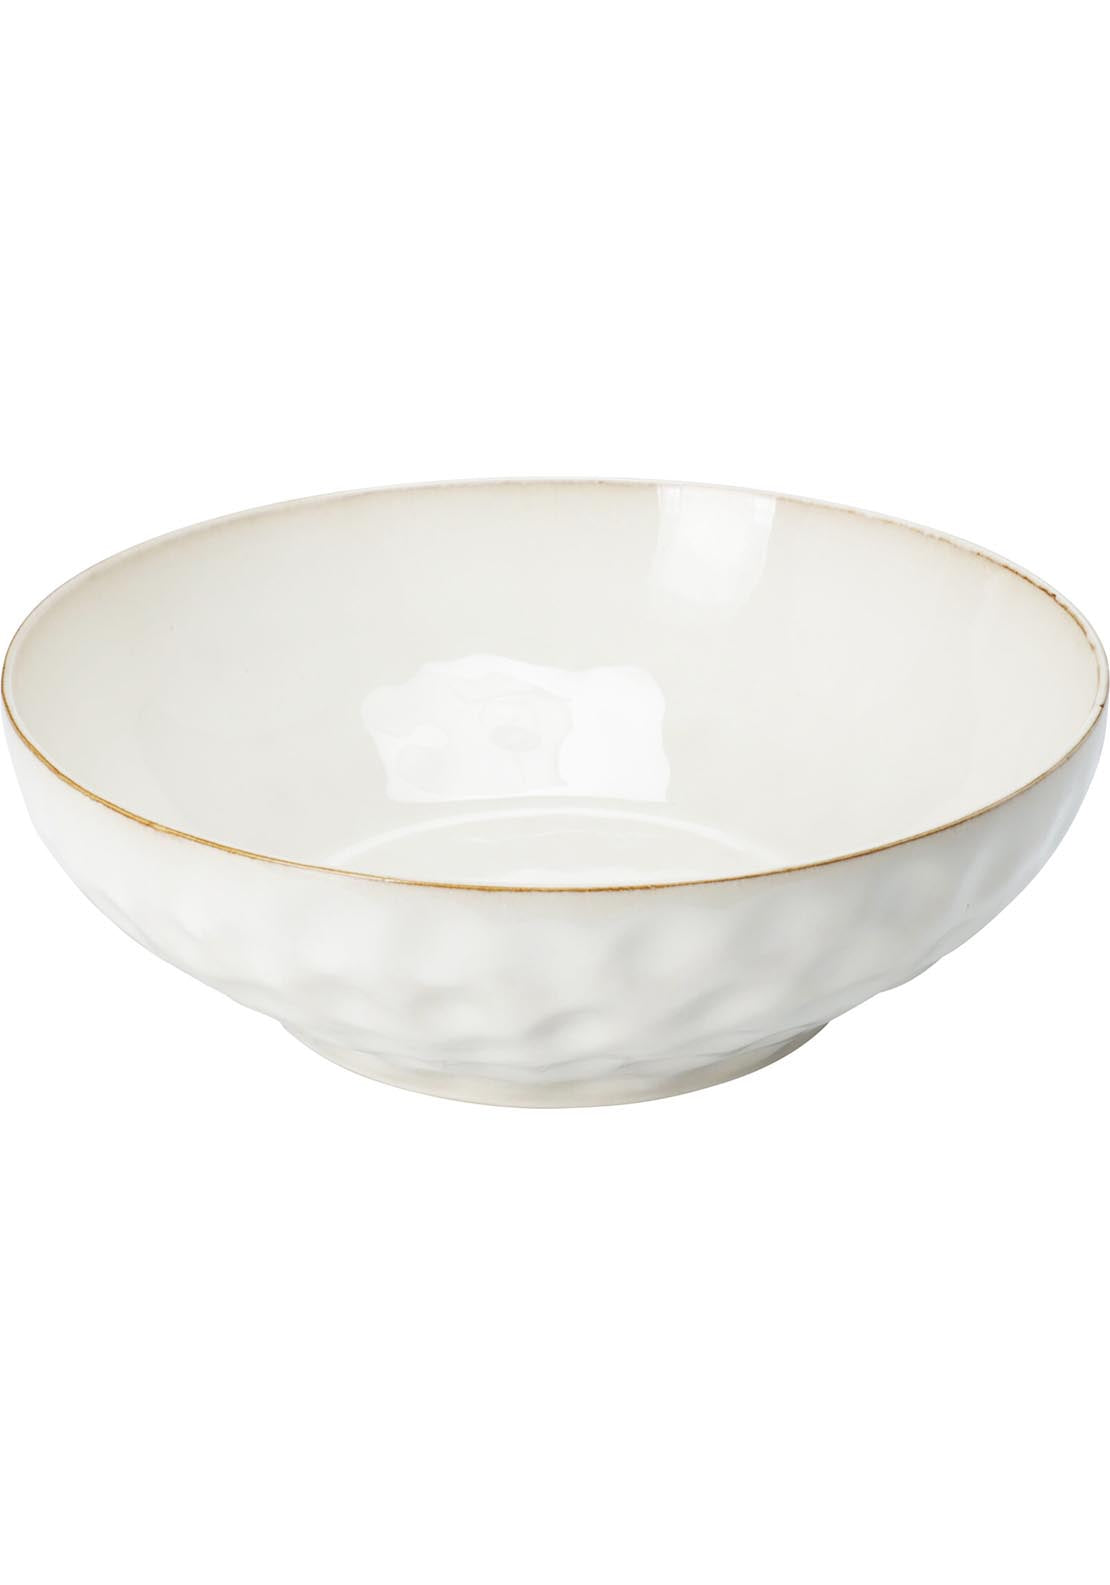 The Home Dining Stoneware Bowl 2500ml 1 Shaws Department Stores